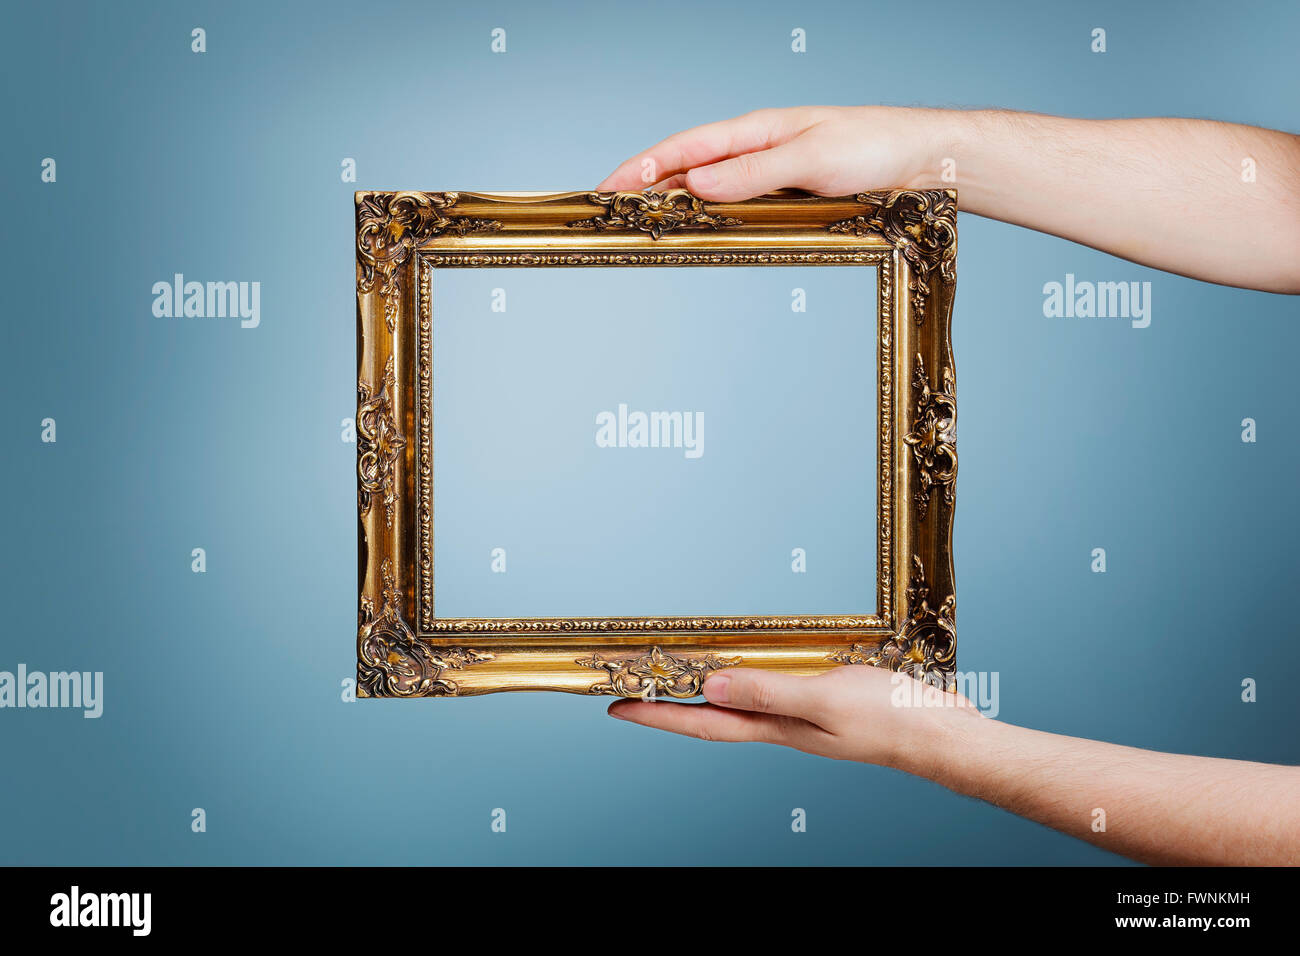 Man holding an antique style golden frame in his hands. Stock Photo